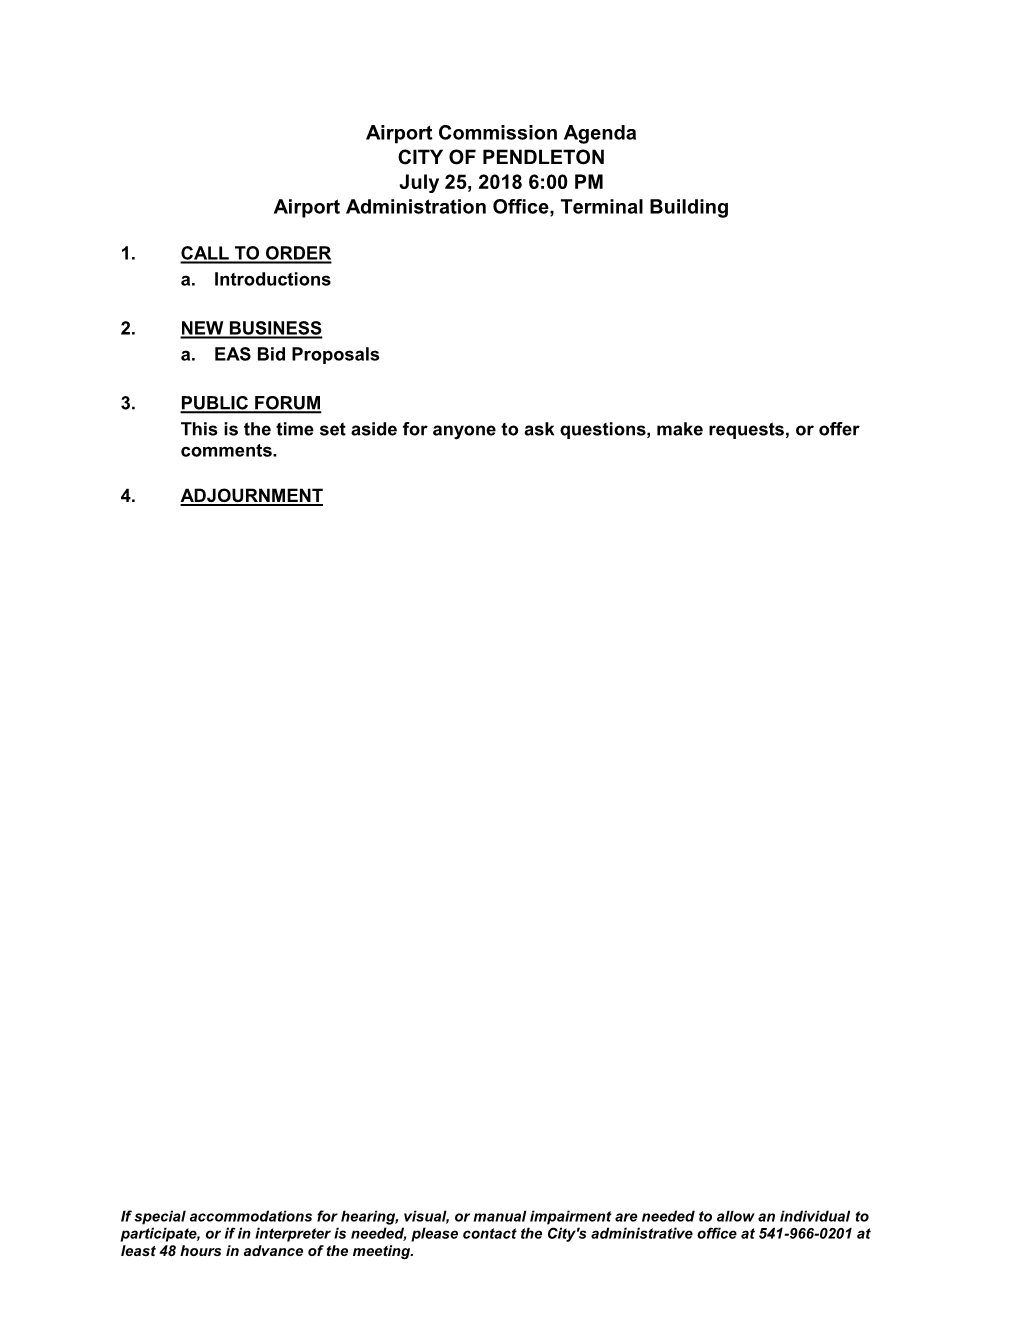 Airport Commission Agenda CITY of PENDLETON July 25, 2018 6:00 PM Airport Administration Office, Terminal Building